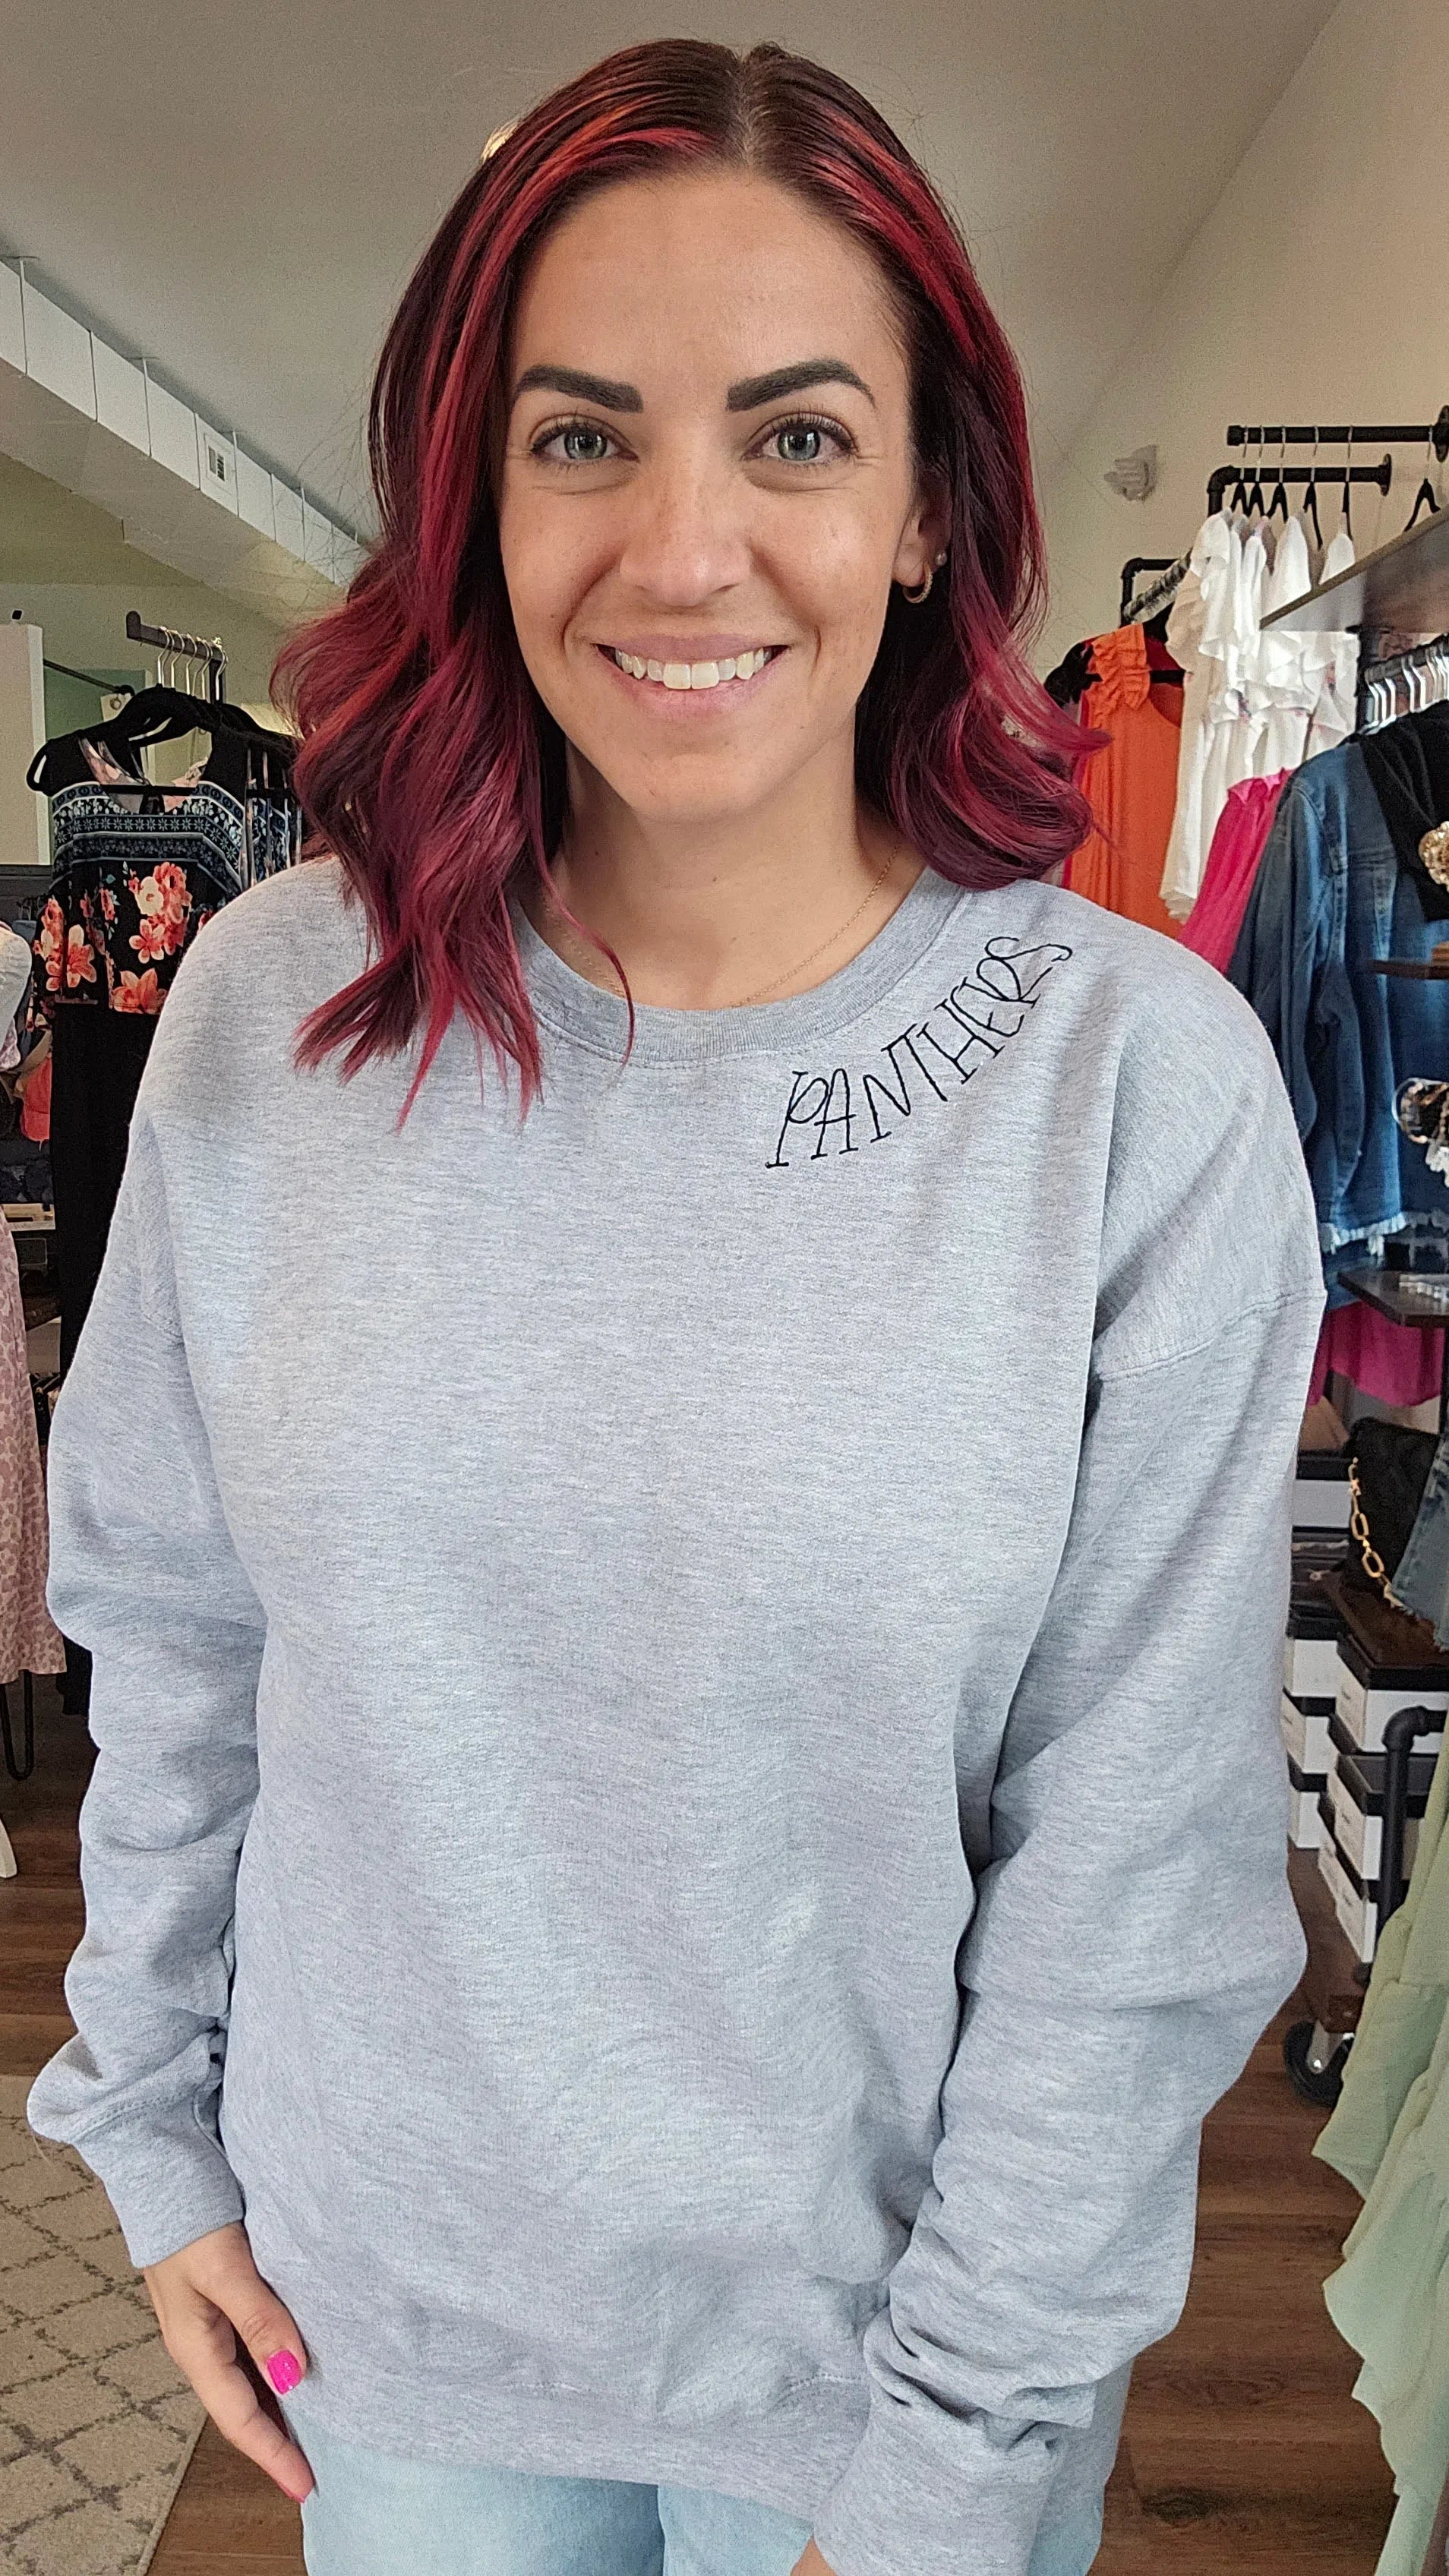 Shop Embroidered Mascot Sweatshirts - Pickerington North Panthers-sweatshirt at Ruby Joy Boutique, a Women's Clothing Store in Pickerington, Ohio